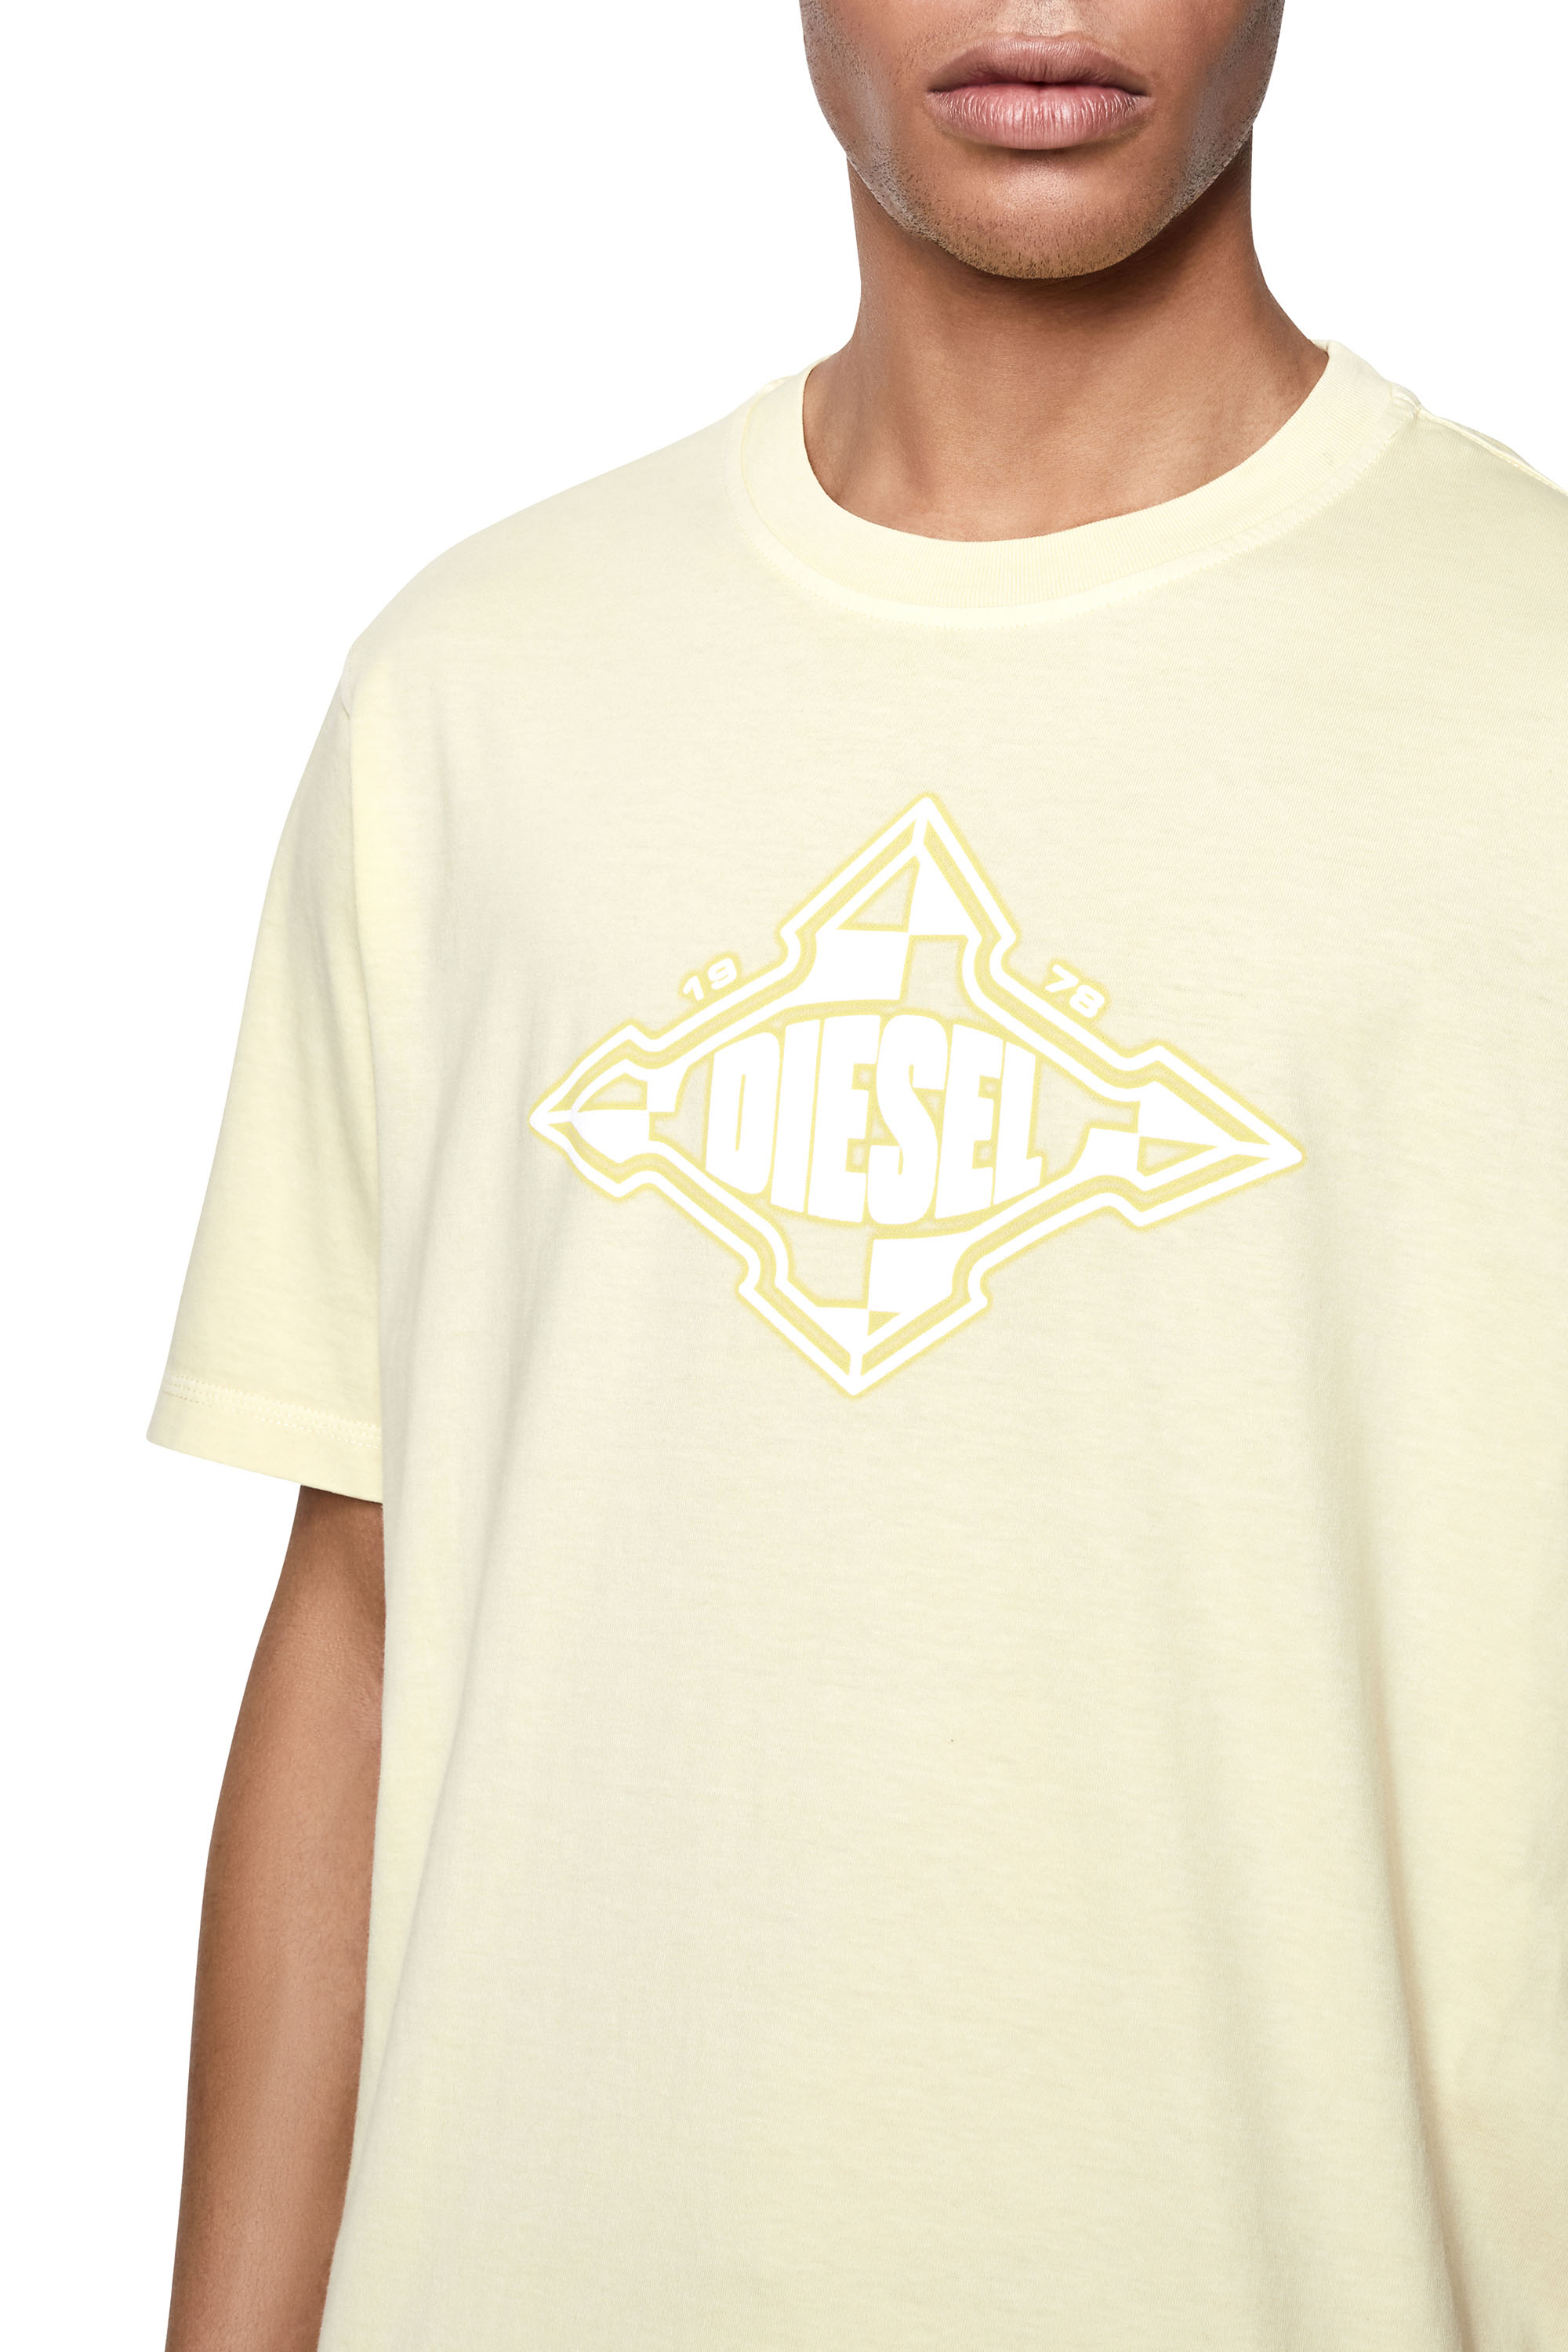 Diesel - T-JUST-D1, Yellow - Image 3